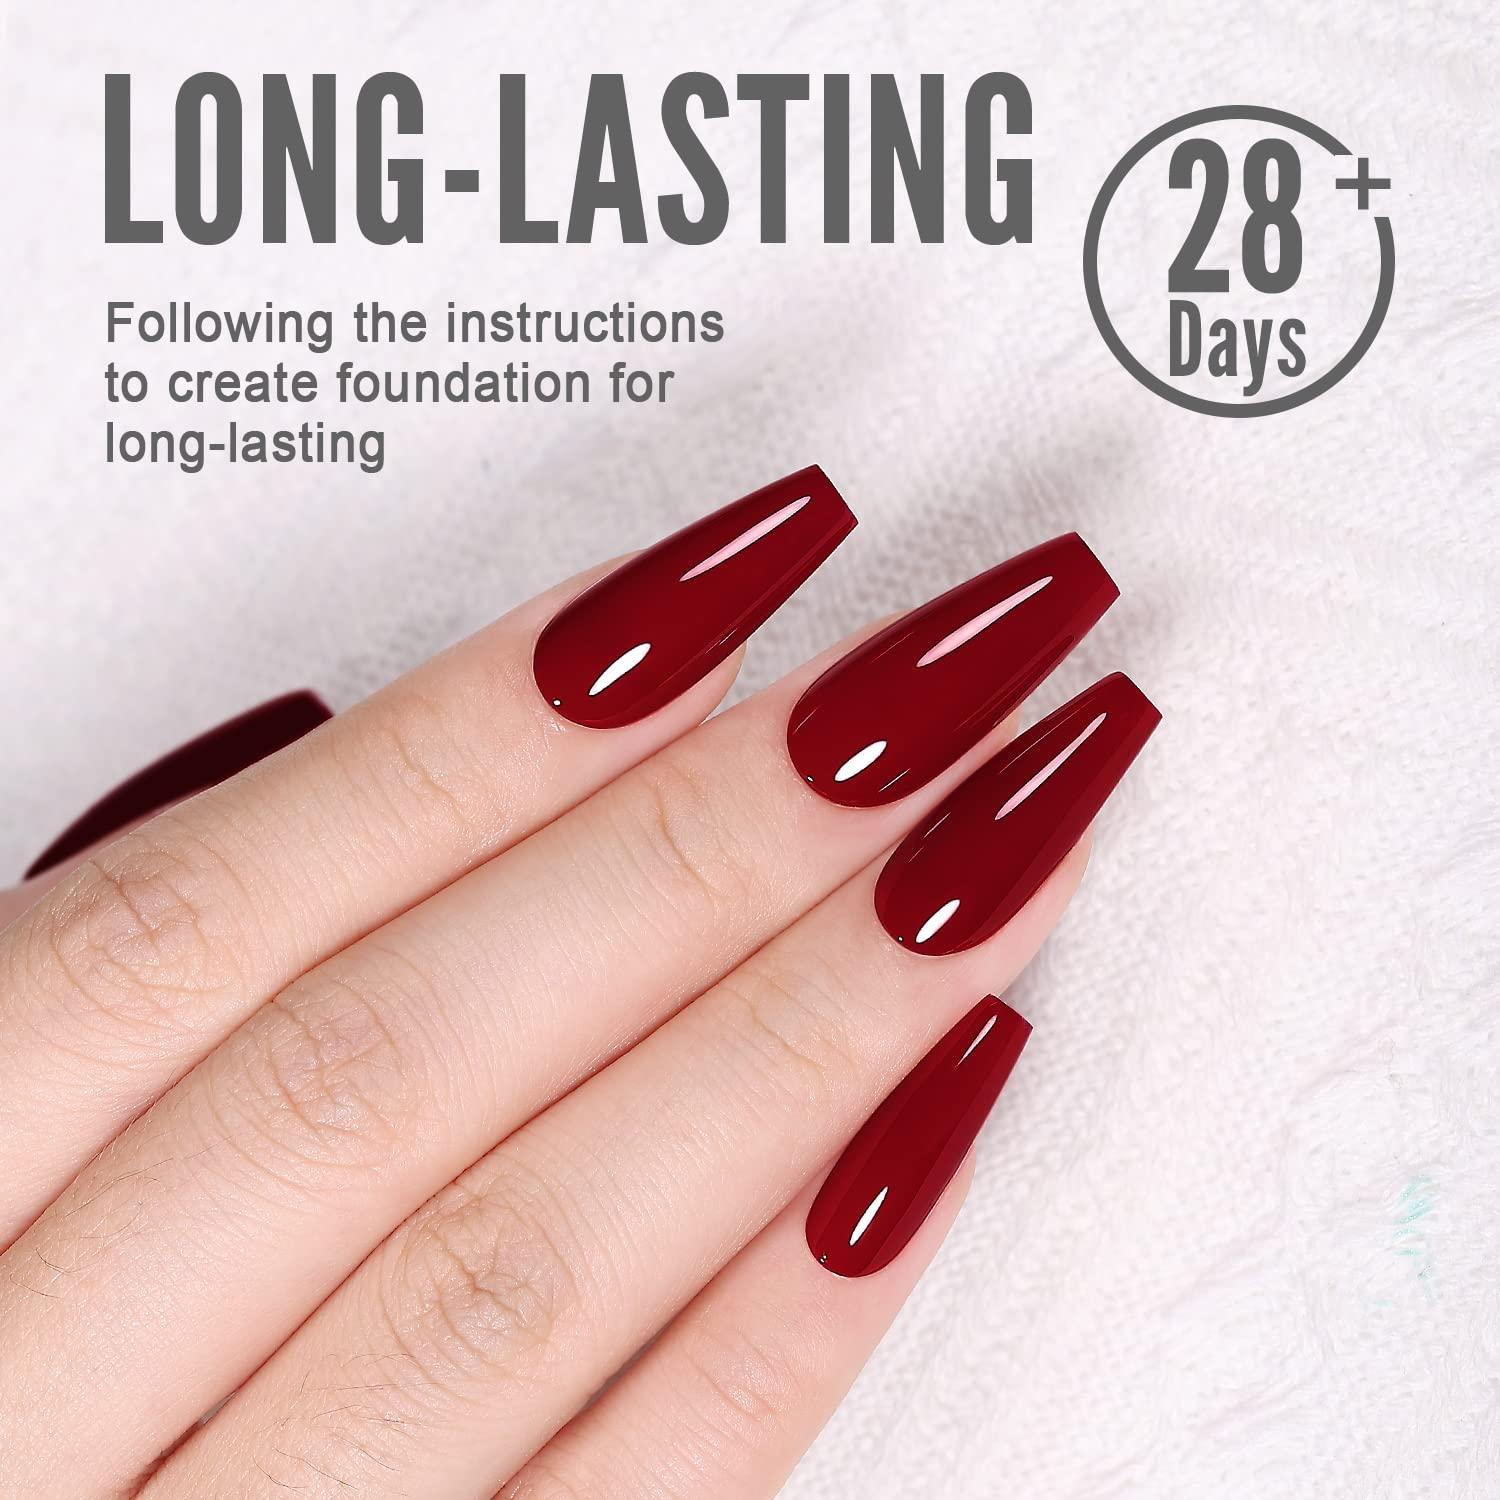 How To DIY Chic Blood Nail Art For Halloween- Lulus.com Fashion Blog